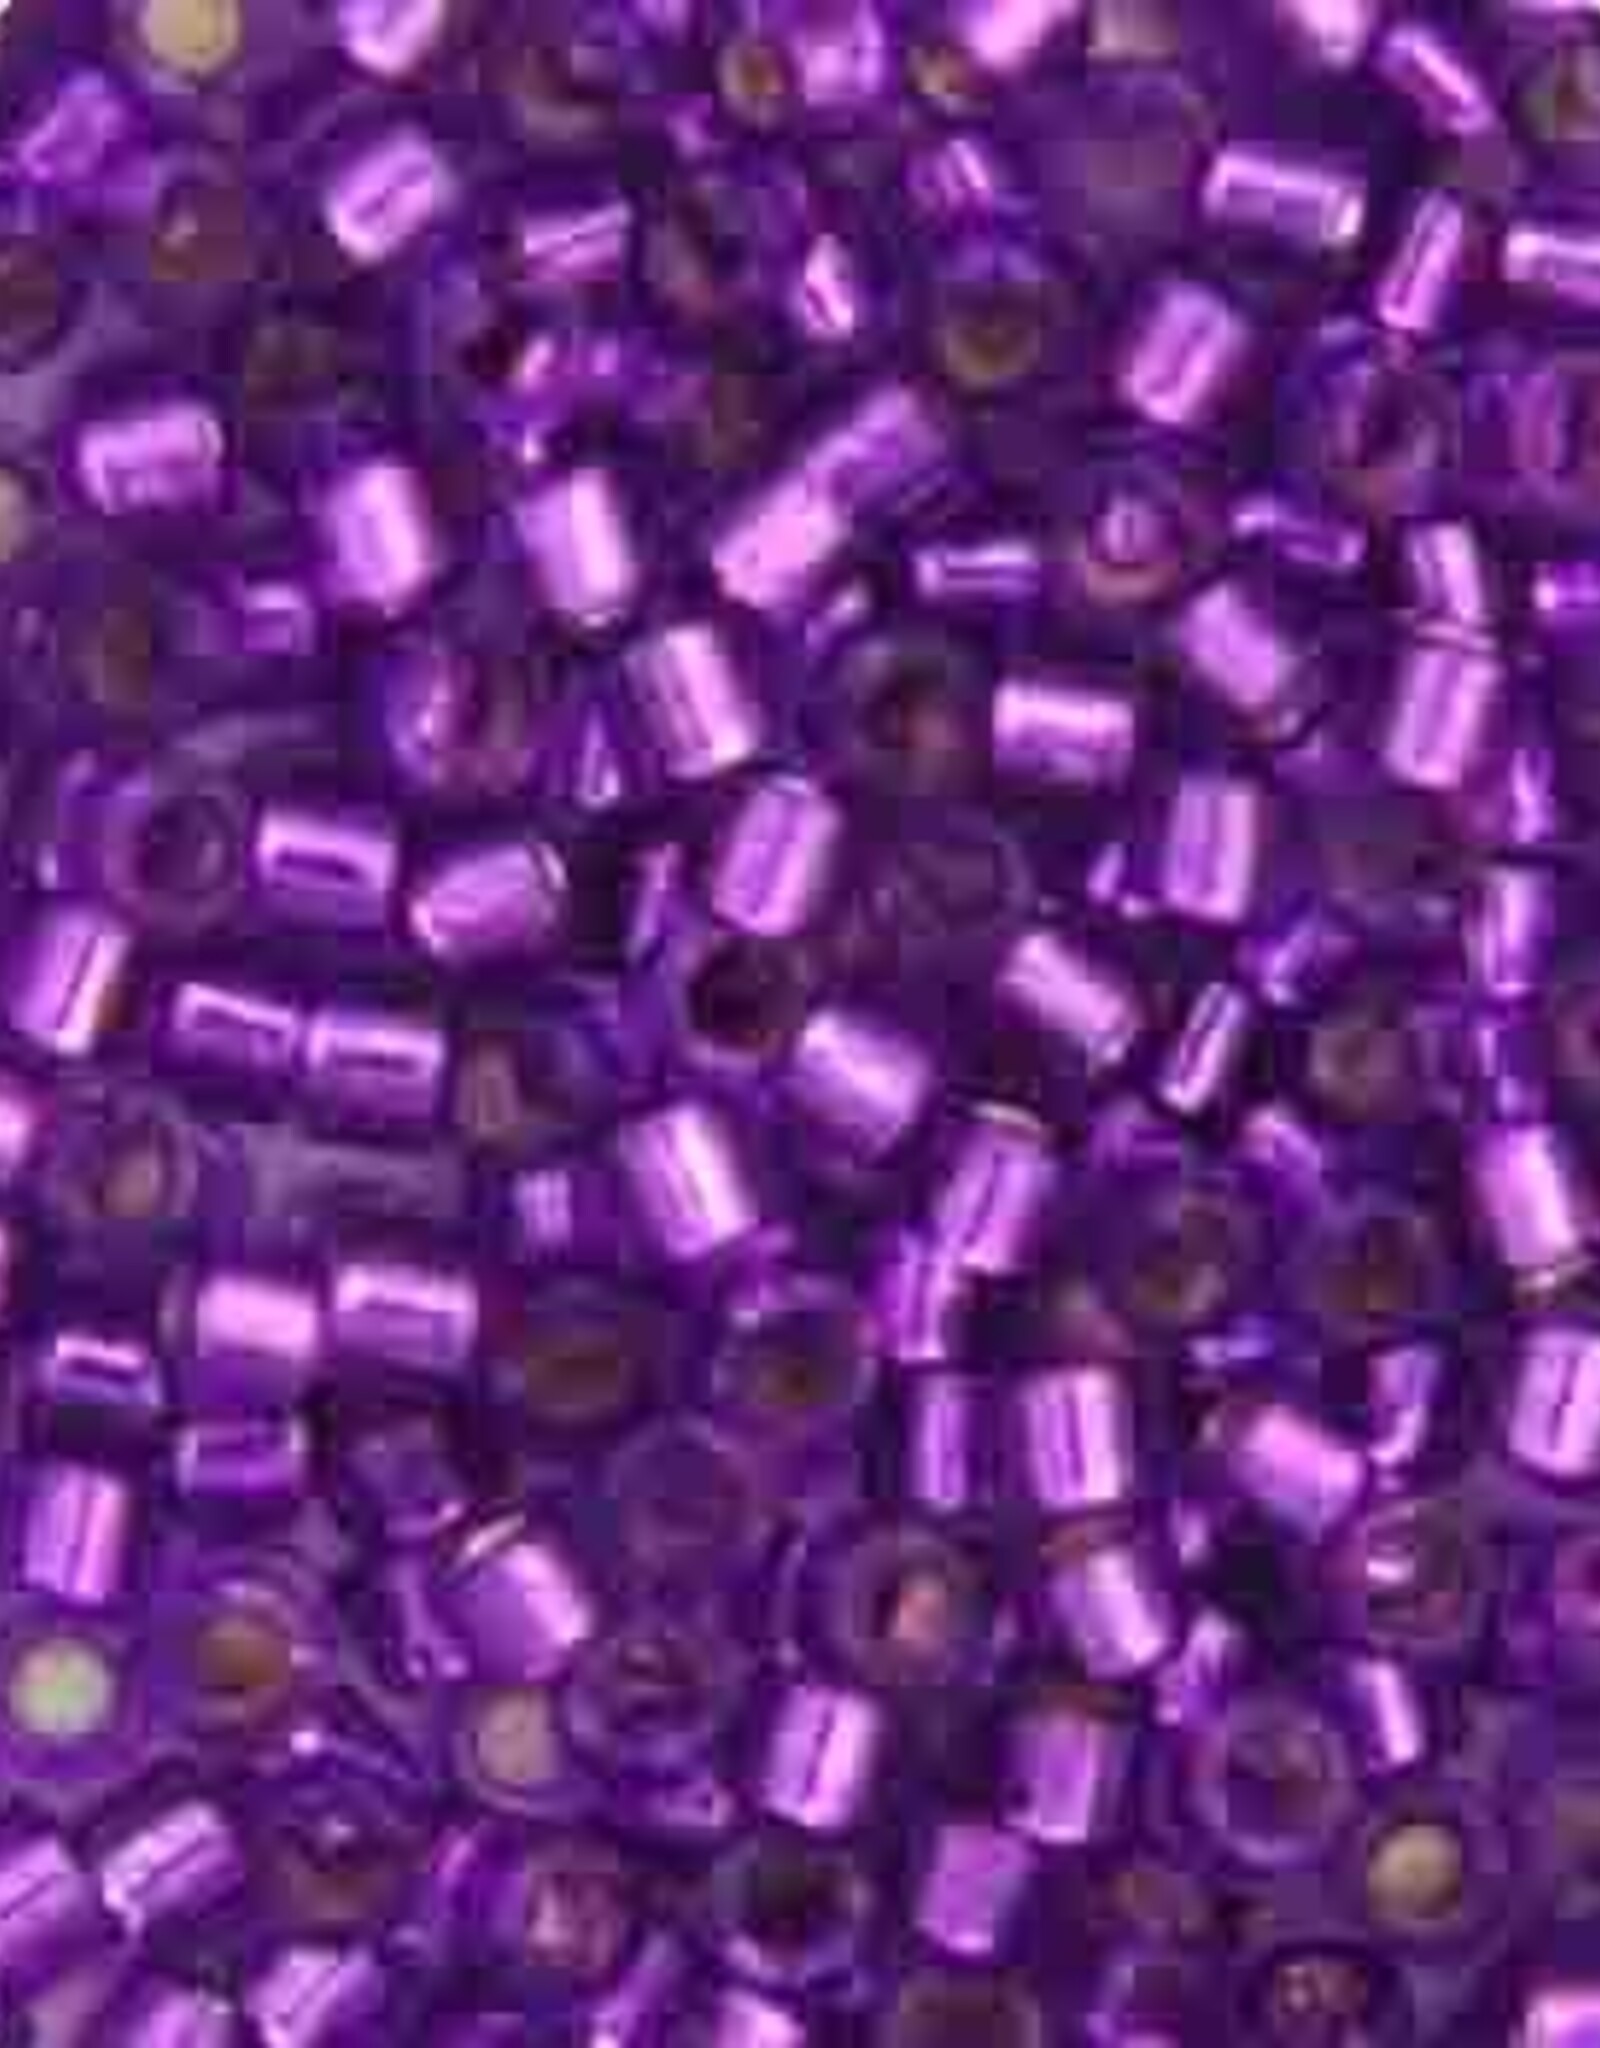 Miyuki Delica Seed Beads Delica Program 11/0 RD Magenta Silver Lined-Dyed 1345V